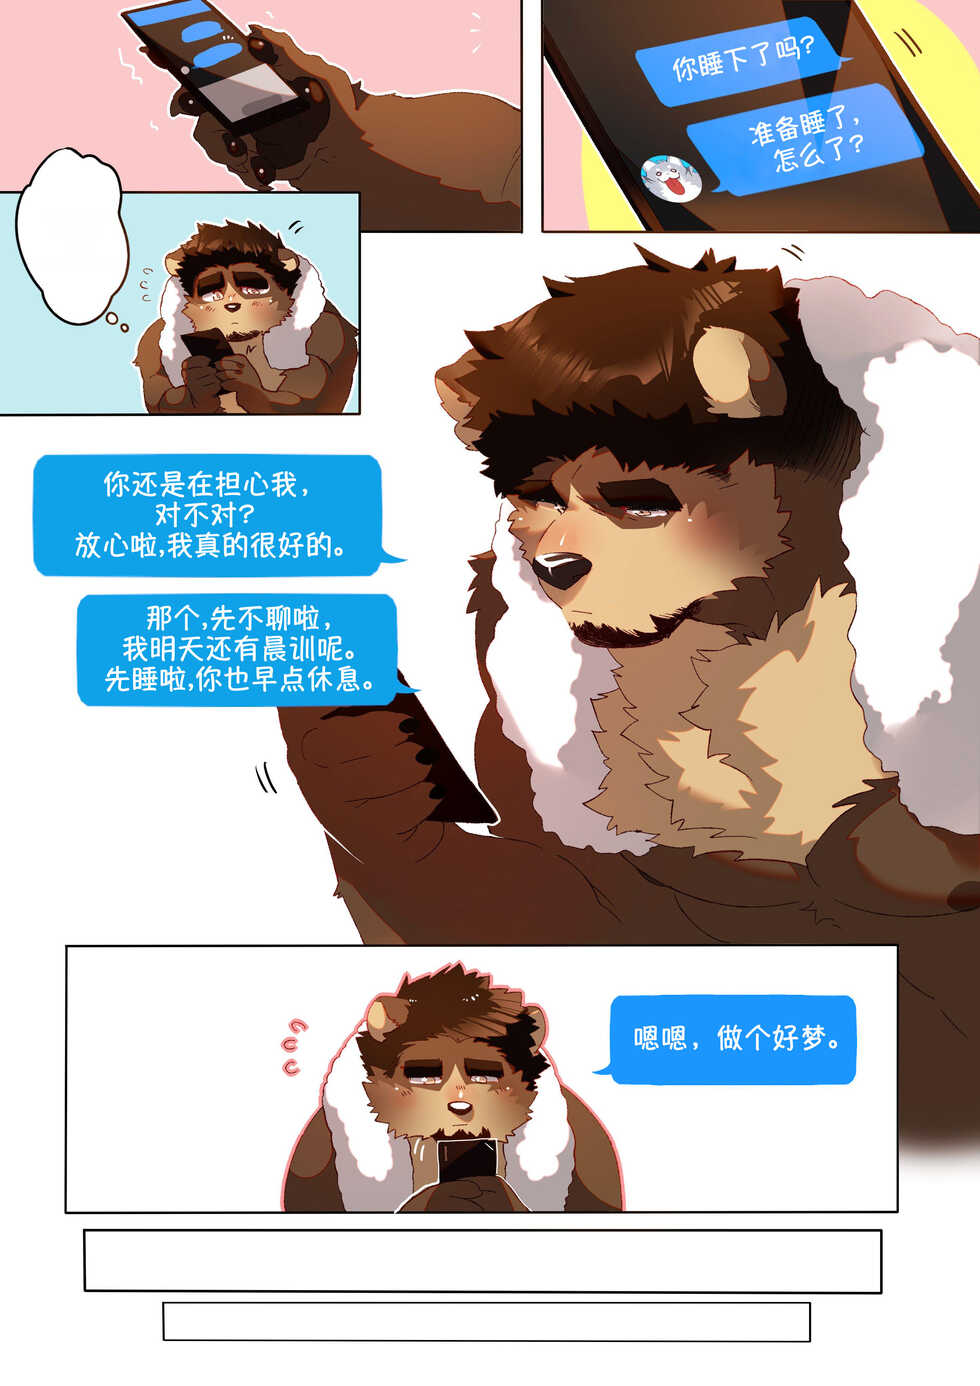 [BooBoo] Passionate Affection 深挚 [Chinese Ver.]  (On Going) - Page 32